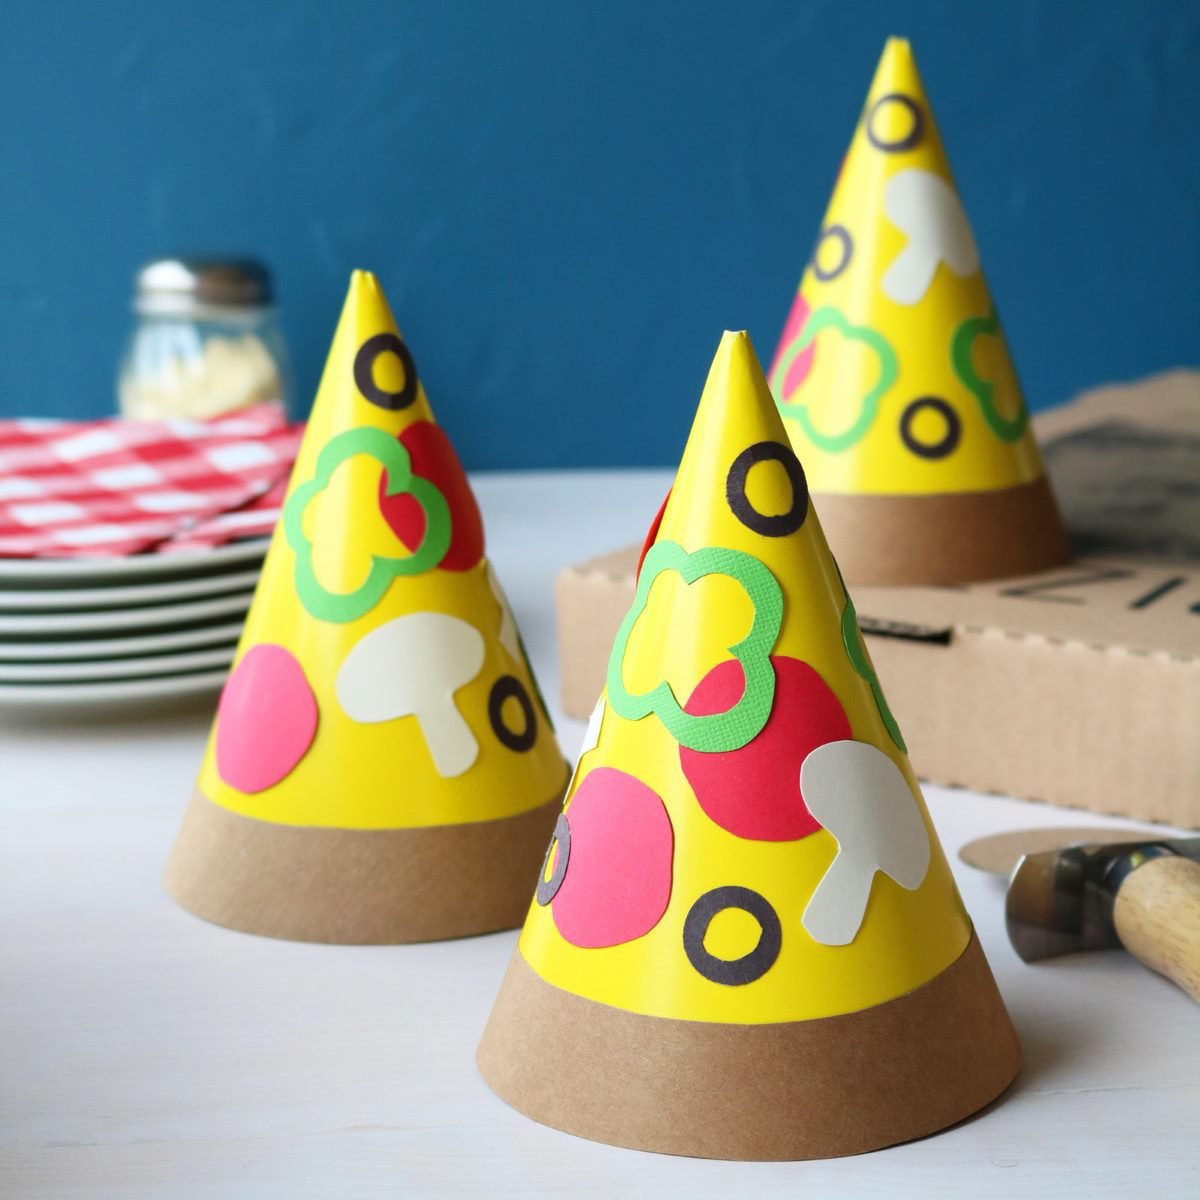 Must-Have Birthday Decoration Items  Simple Birthday Decoration Ideas &  Images